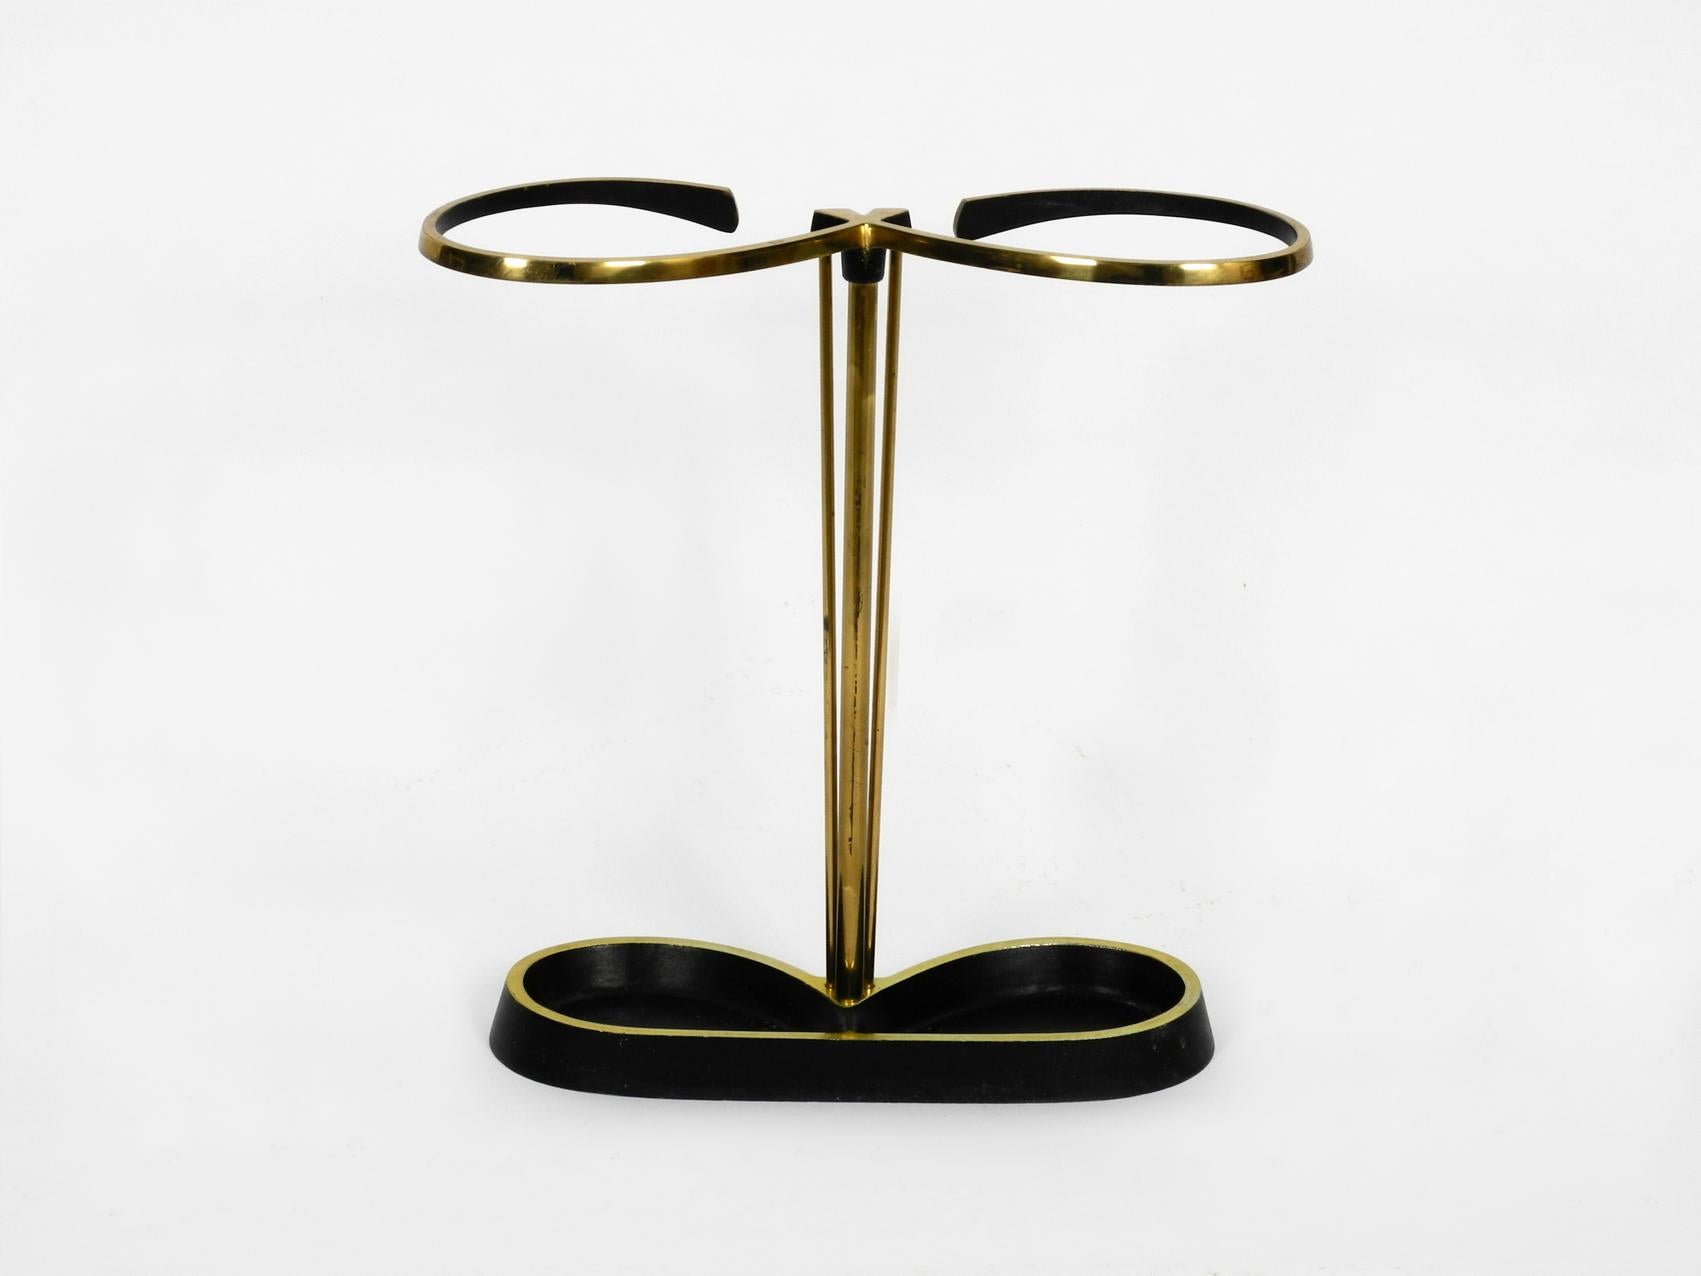 Very elegant Mid-Century Modern umbrella stand made of brass and with a cast iron base. Design by Walter Bosse. Made in Austria. Minimalistic high quality design.
Very good condition without damages and with minimal traces of wear.
100% original